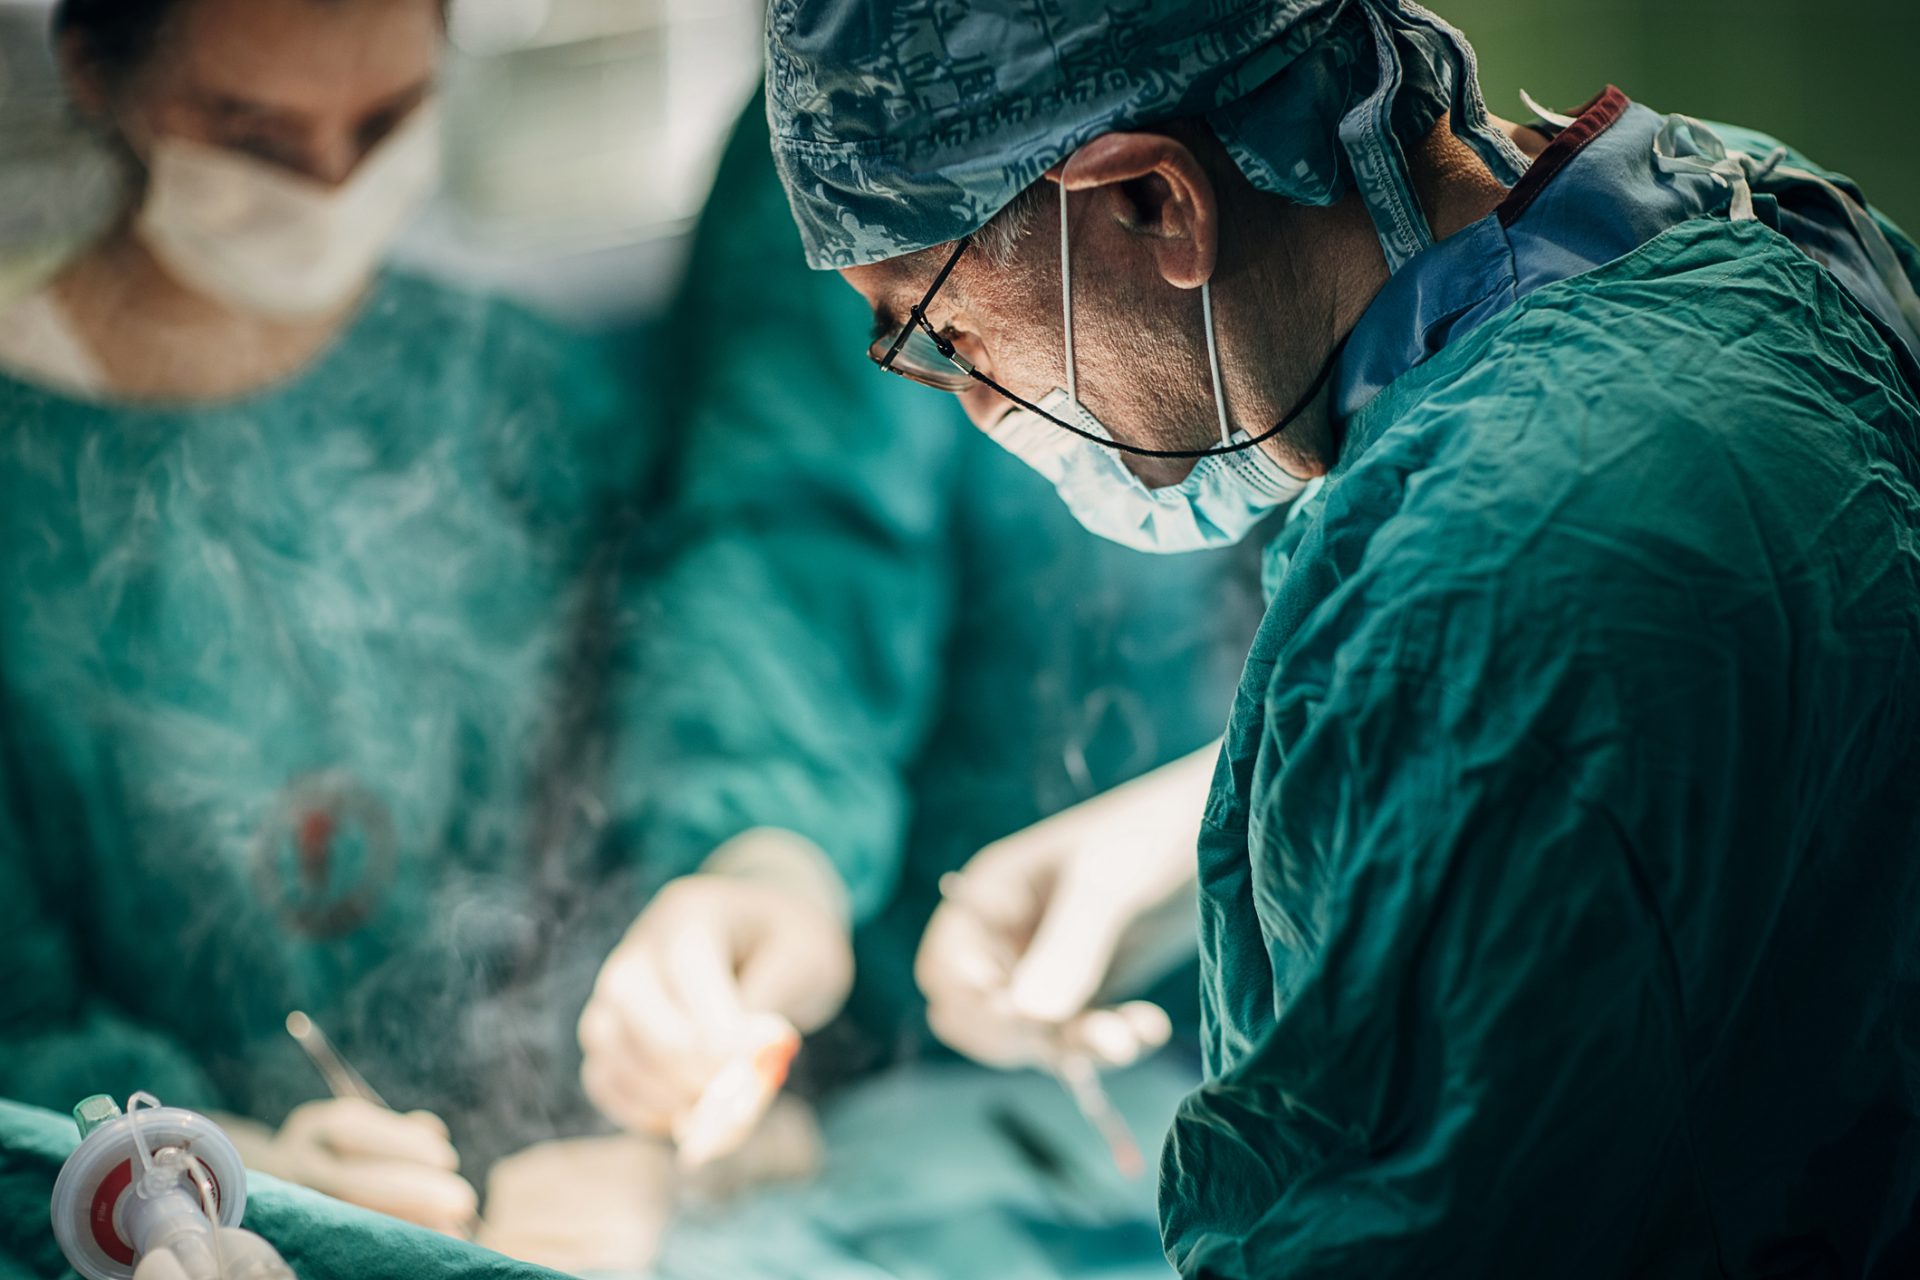 Surgeons successfully transplanted a kidney from a pig to a man